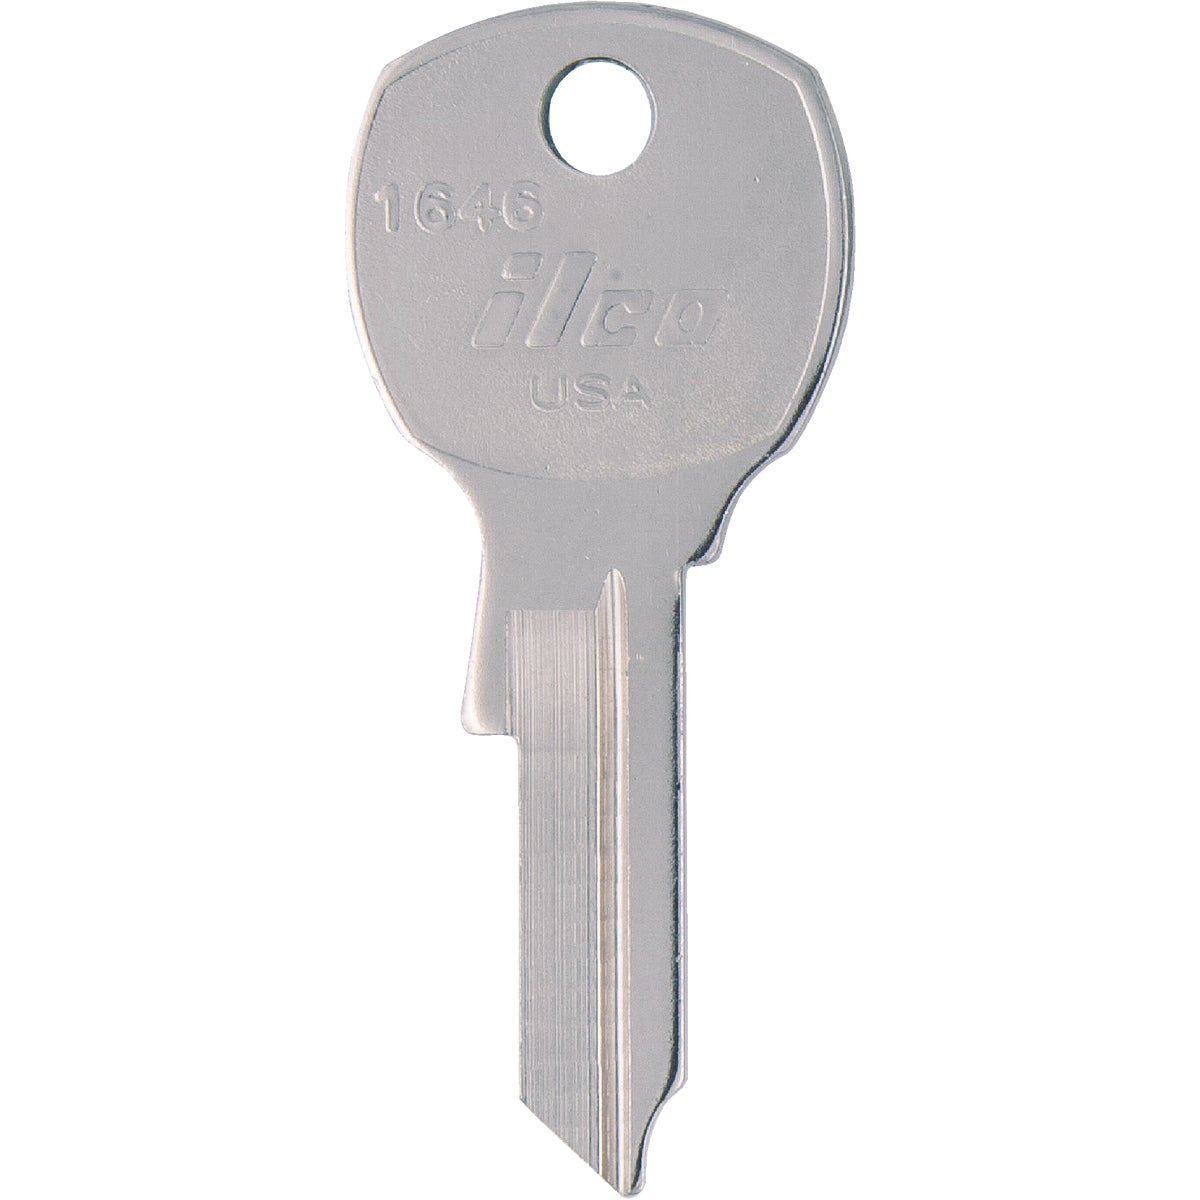 ILCO National Nickel Plated Mailbox Key, 1646 (10-Pack)